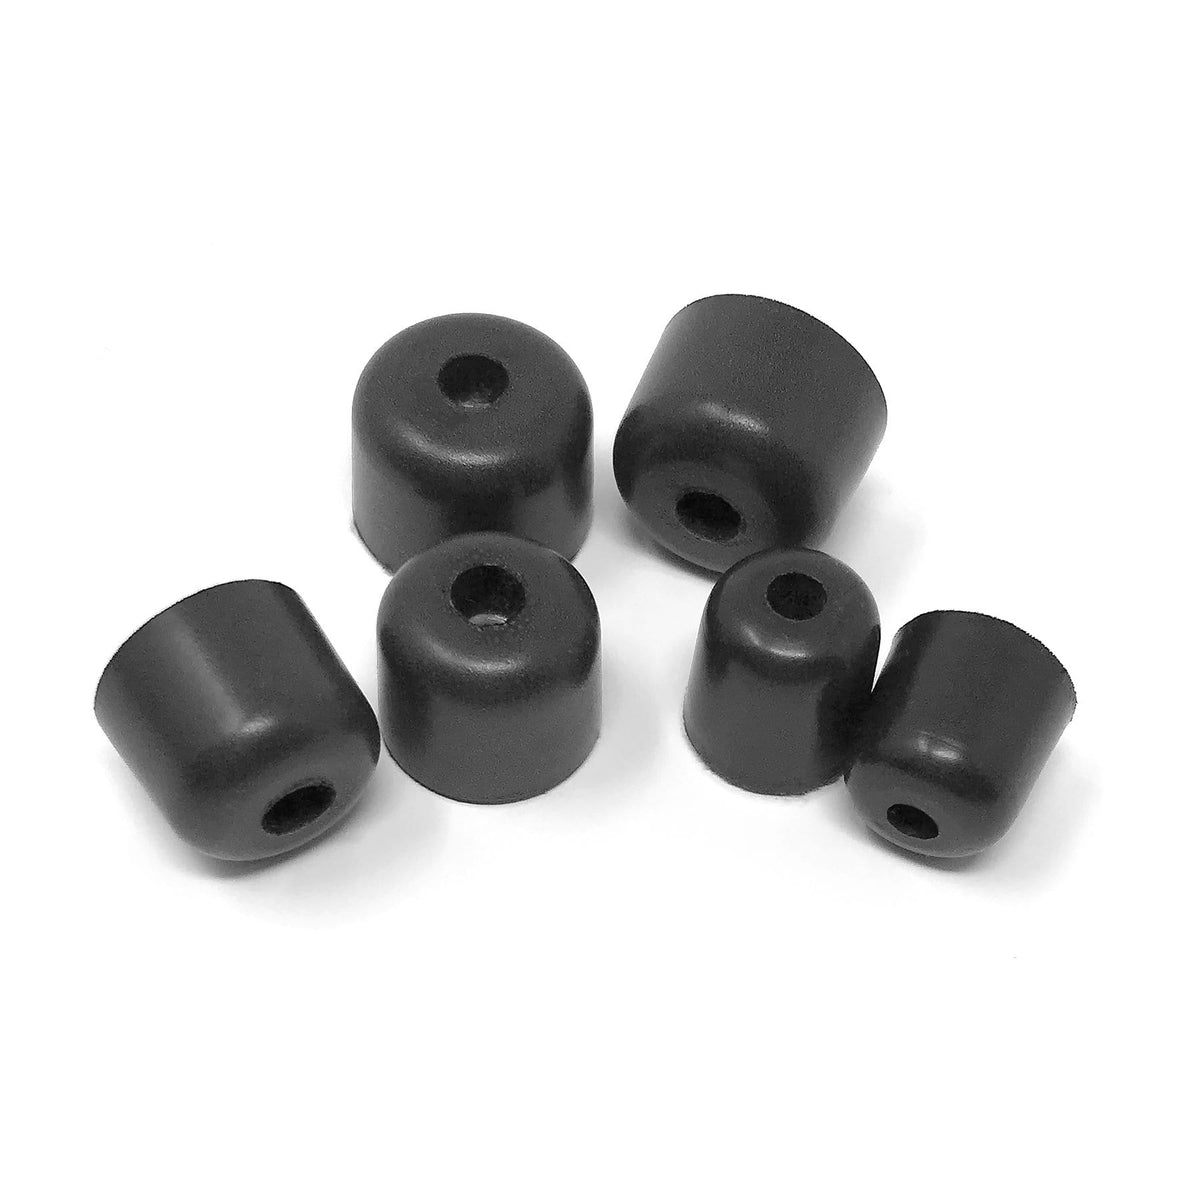 ISOtunes Short TRILOGY™ Foam Replacement Eartips for ISOtunes FREE  (5 Pair Pack)